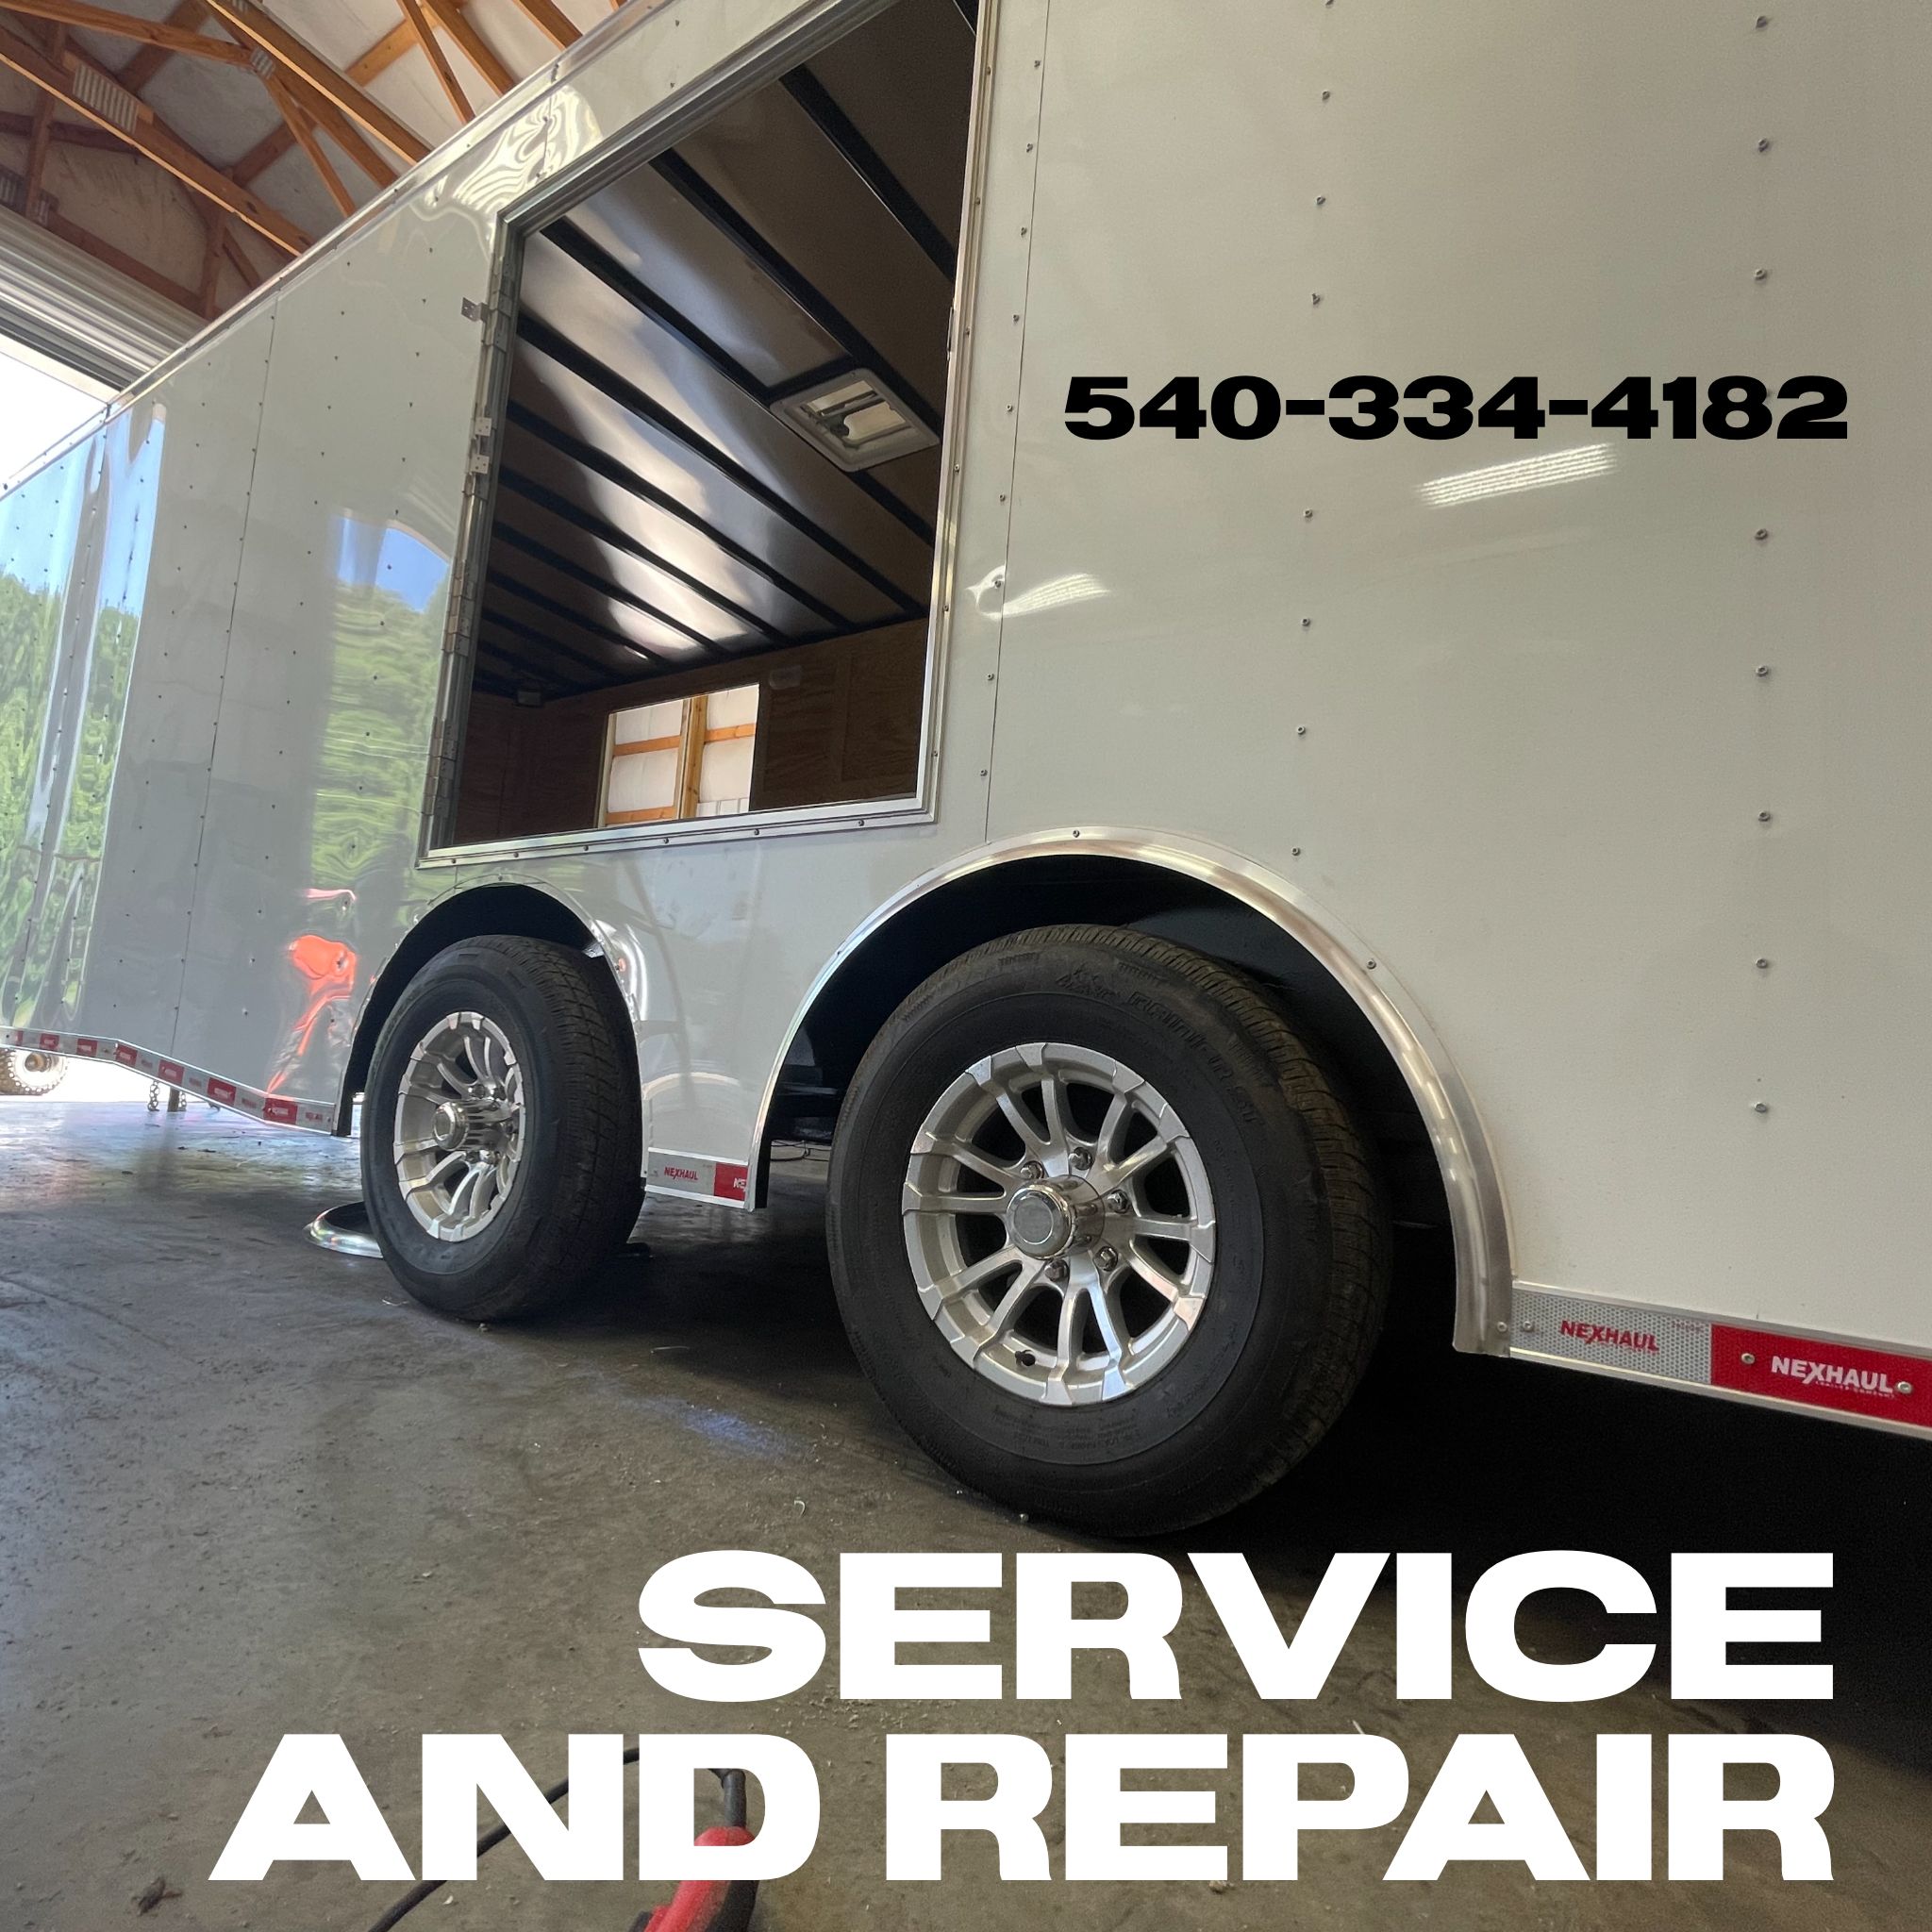 You are currently viewing Trailer Collision Repair & Parts Solutions at Pro-line Trailers